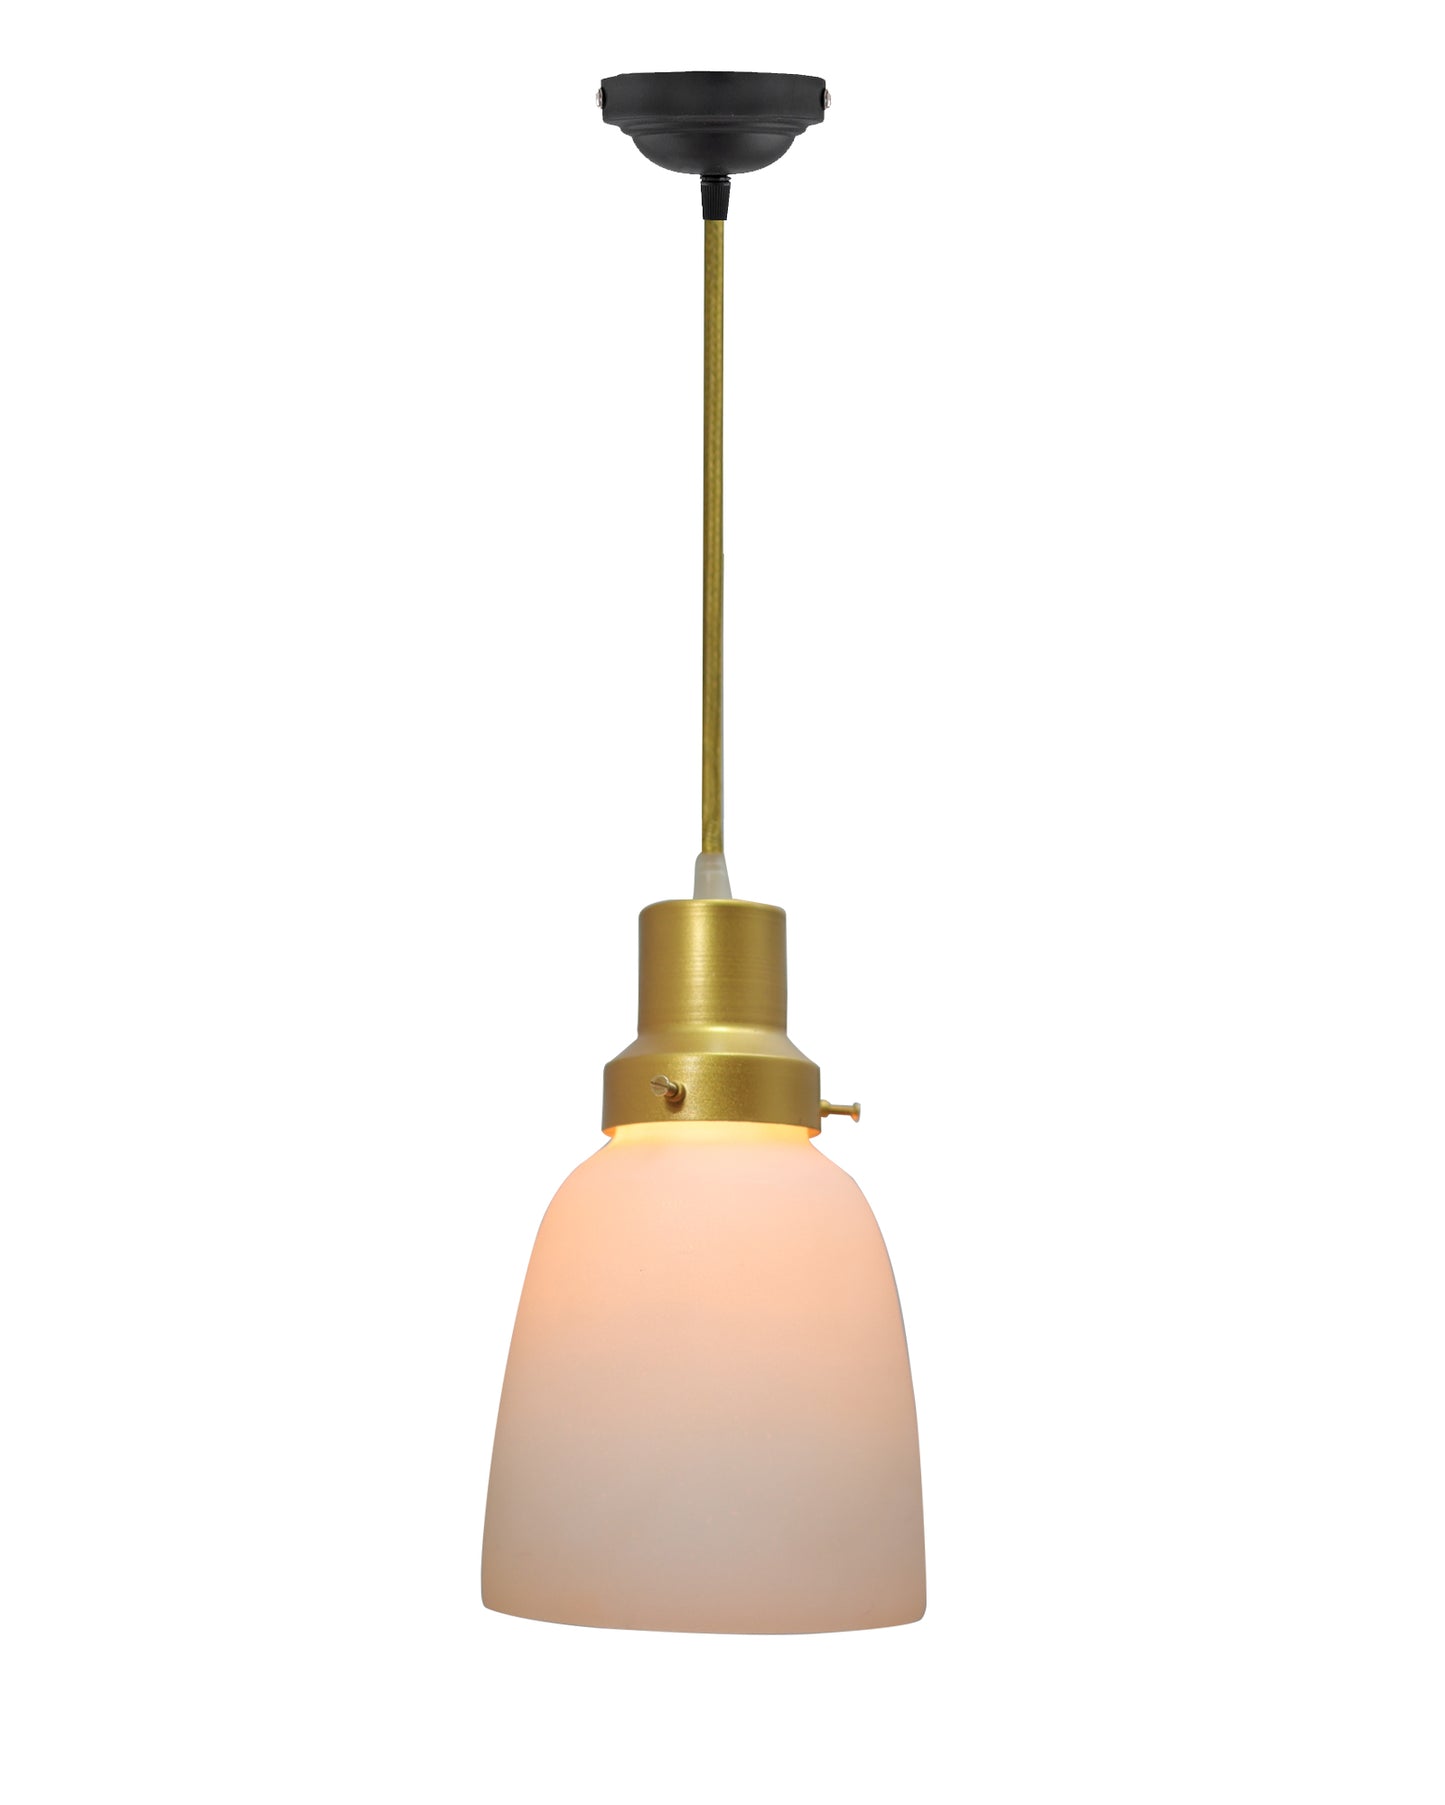 Pendant Light Fixtures Adjustable Hanging Lights Vintage White Frosted Glass Shade Nordic Dining Room Living Room Bedroom, Glossy Golden Fitting